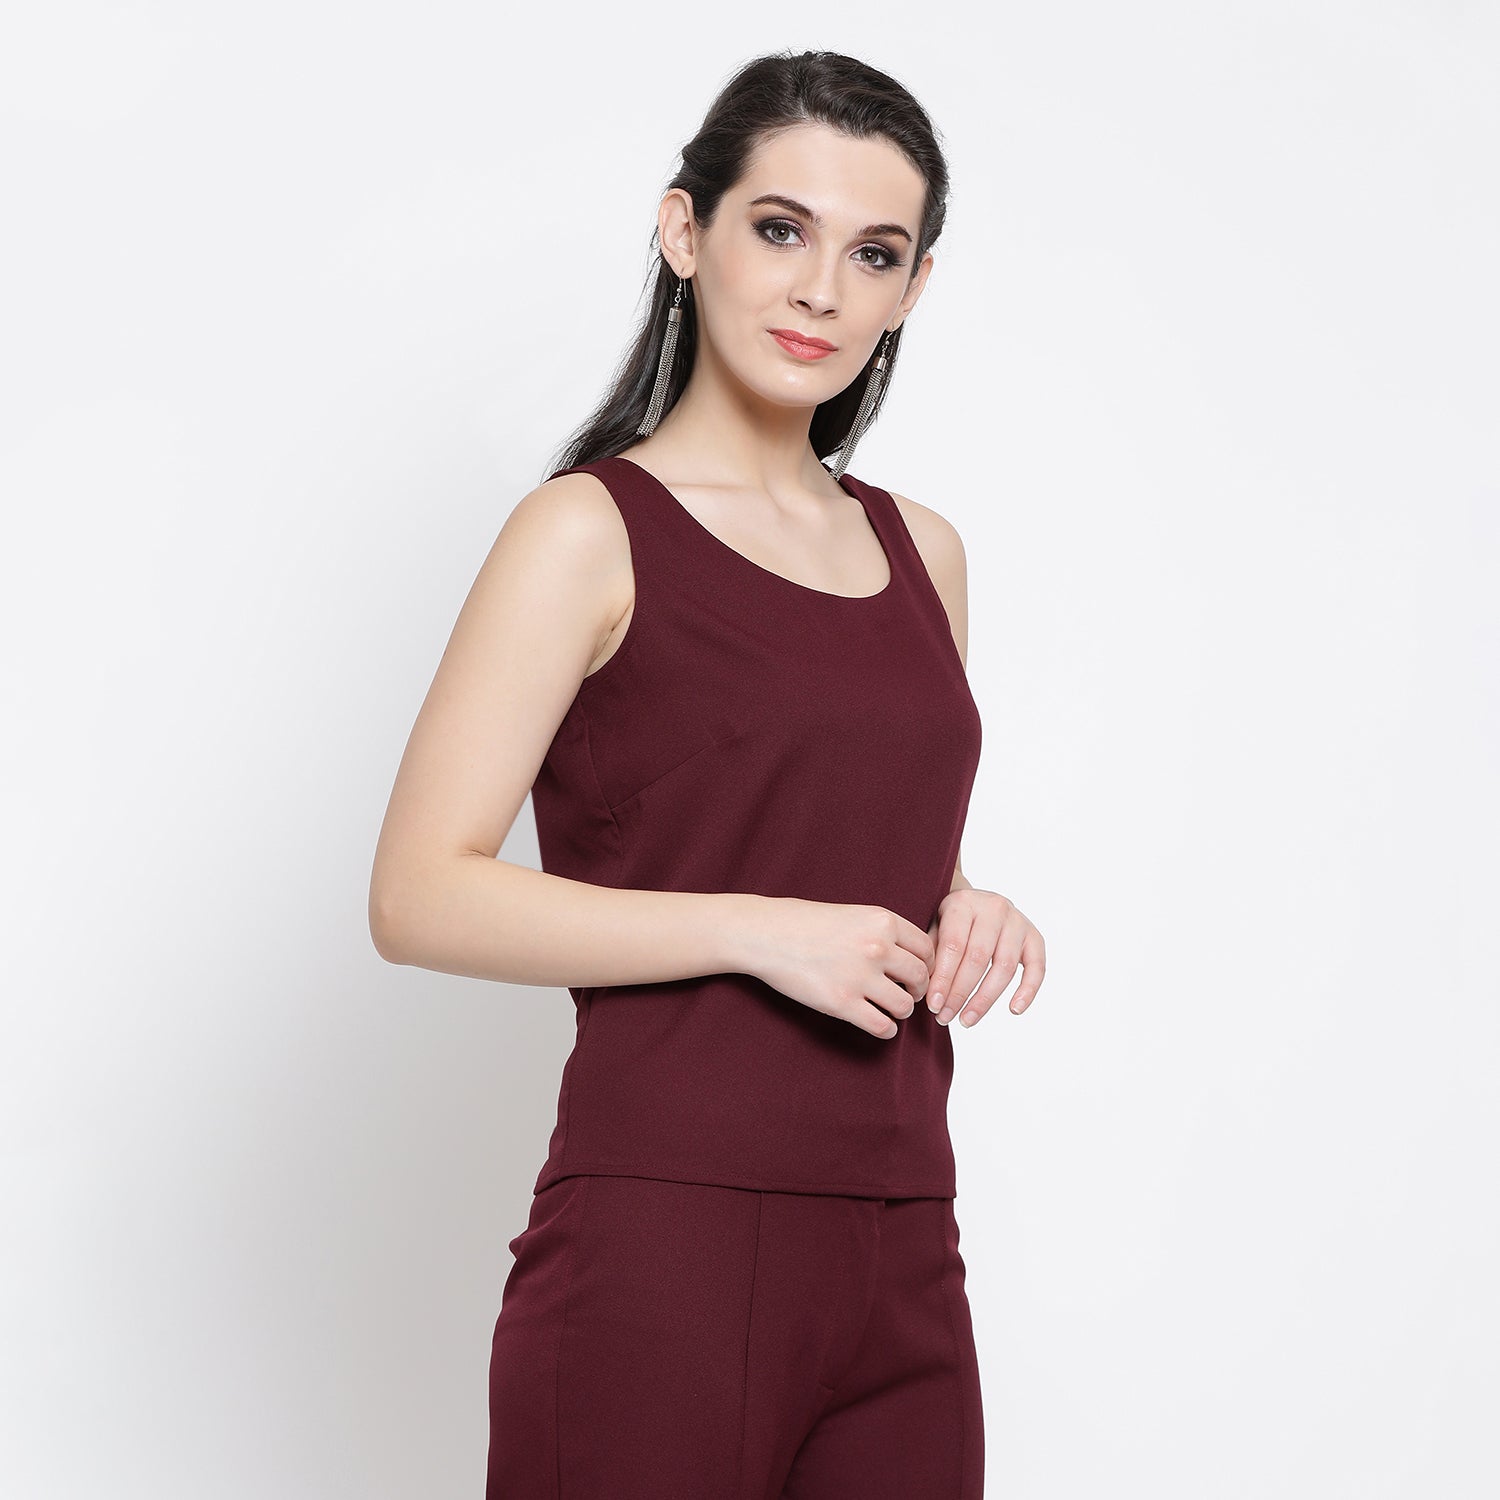 Prune Sleeveless Top By Office And You